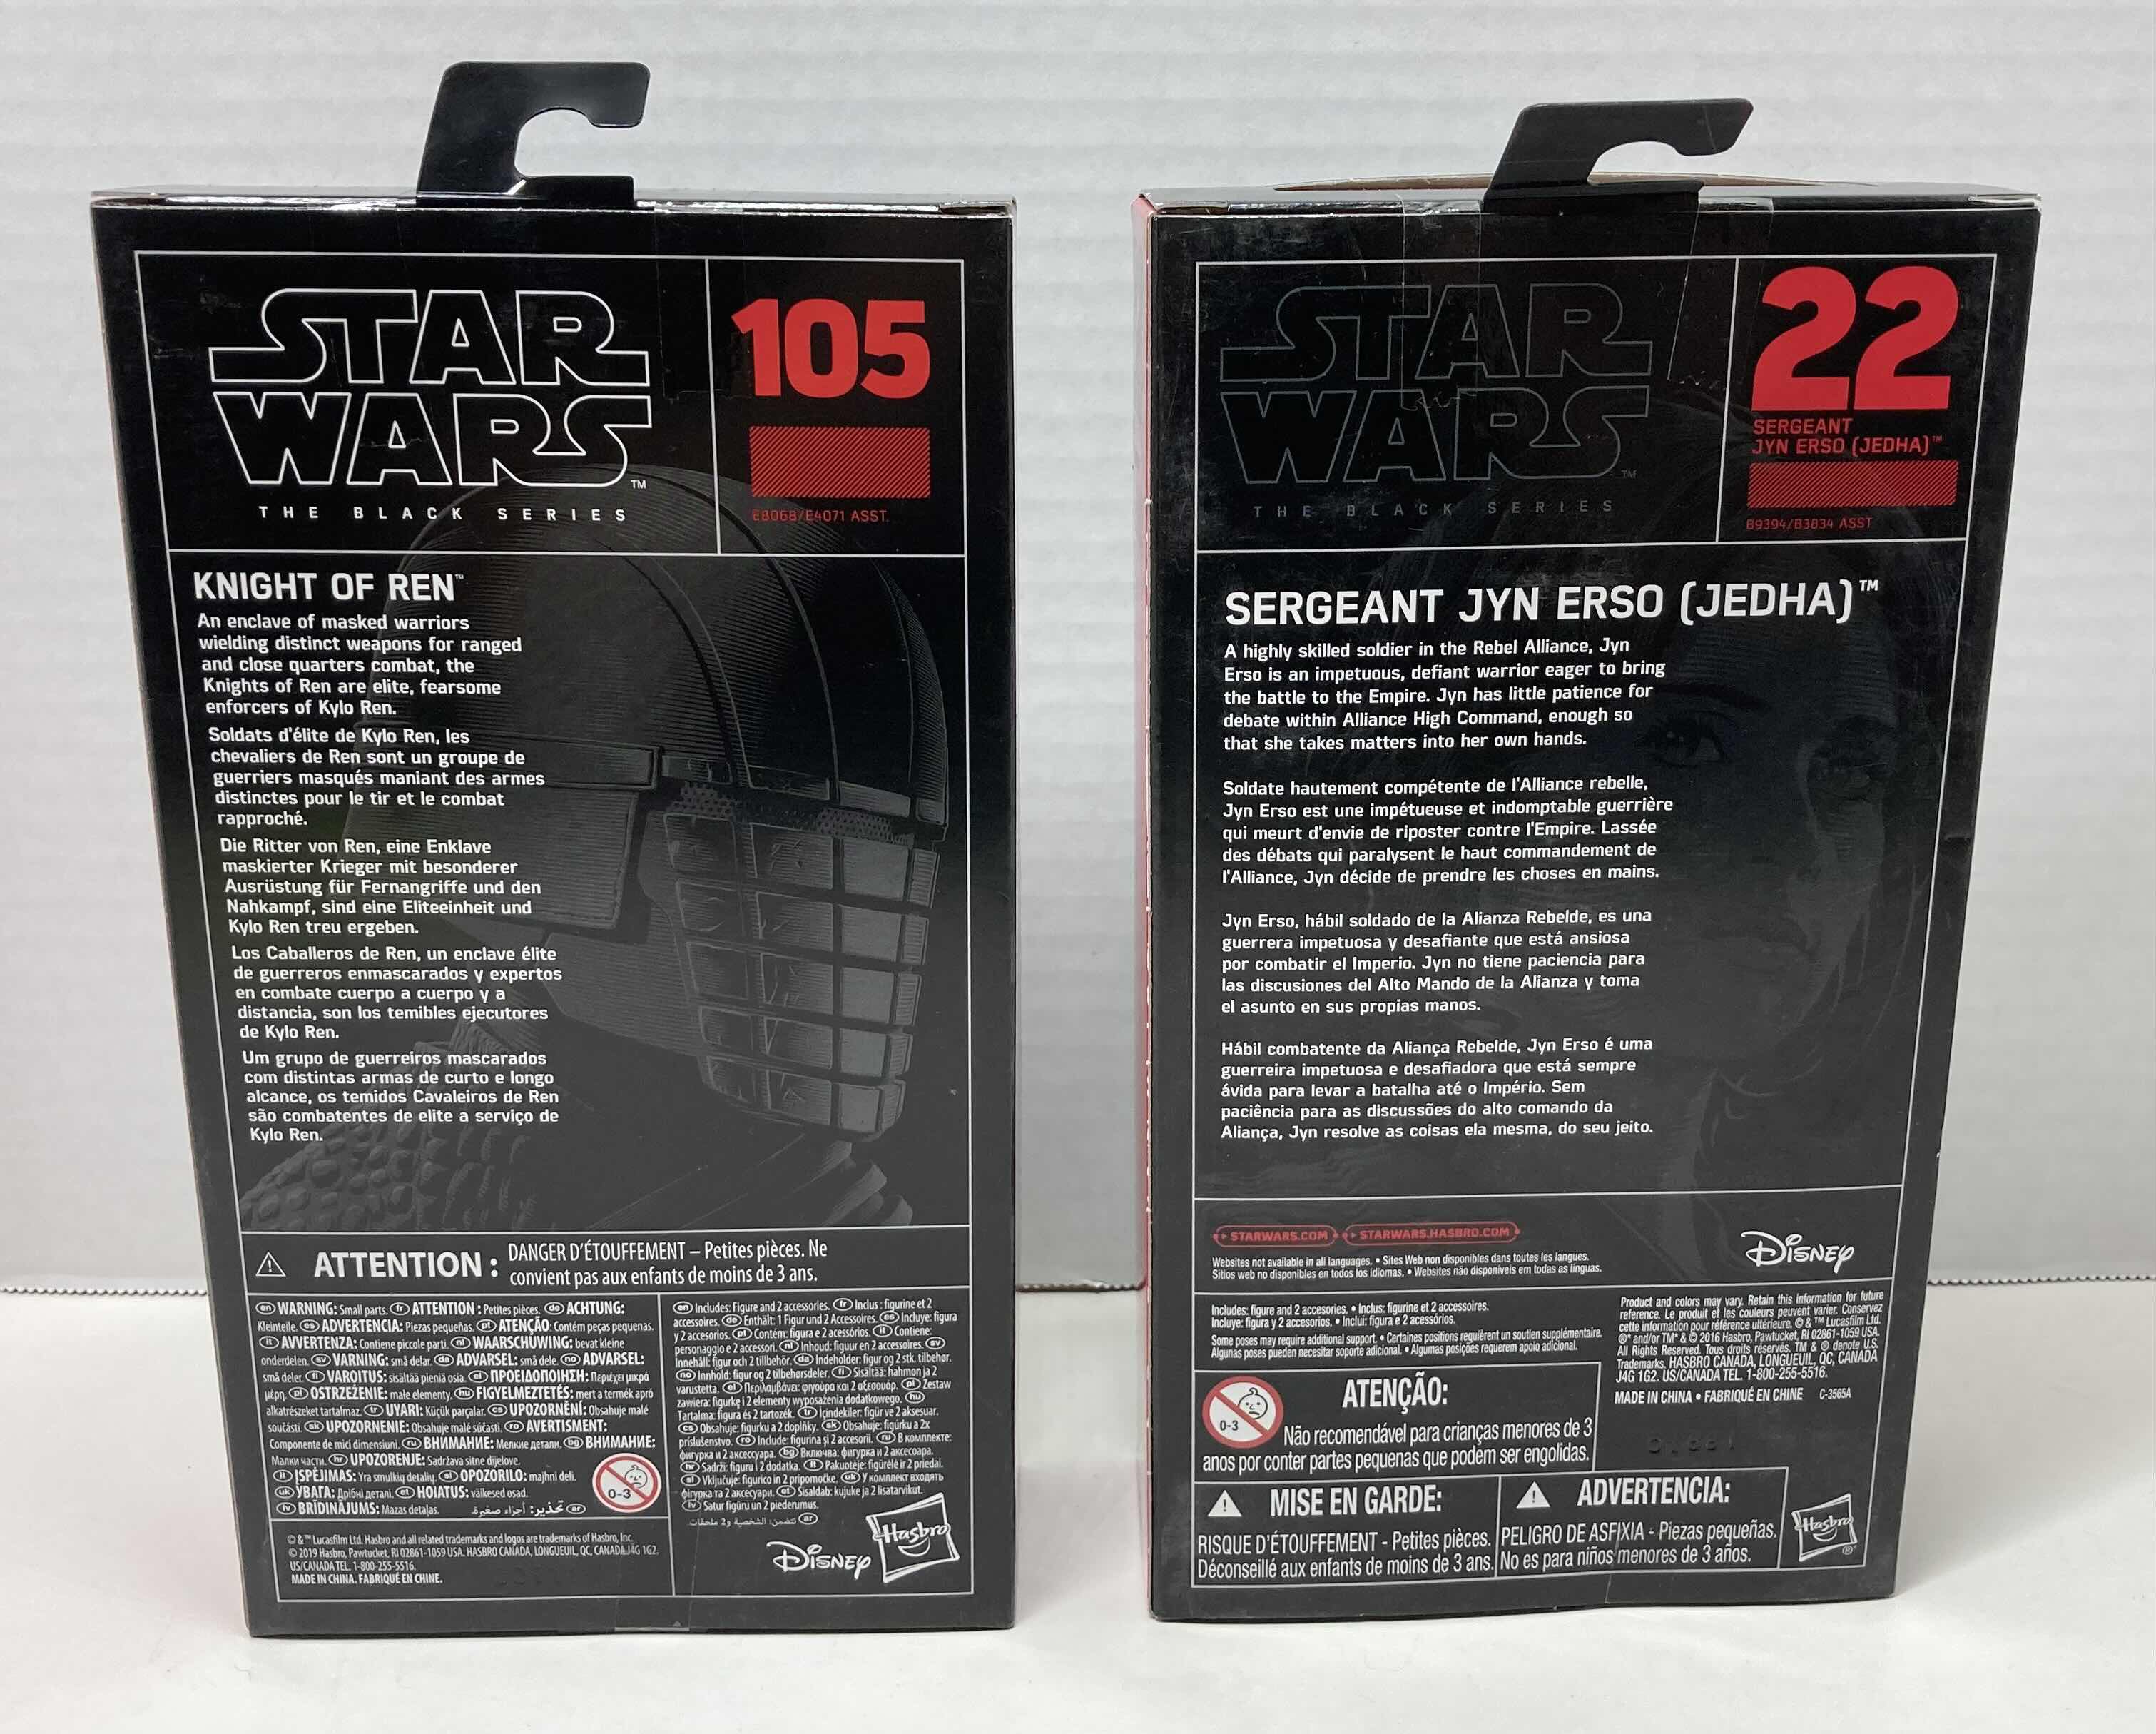 Photo 2 of NEW STAR WARS BLACK SERIES 2-PACK ACTION FIGURES, KNIGHT OF REN & JYN ERSO